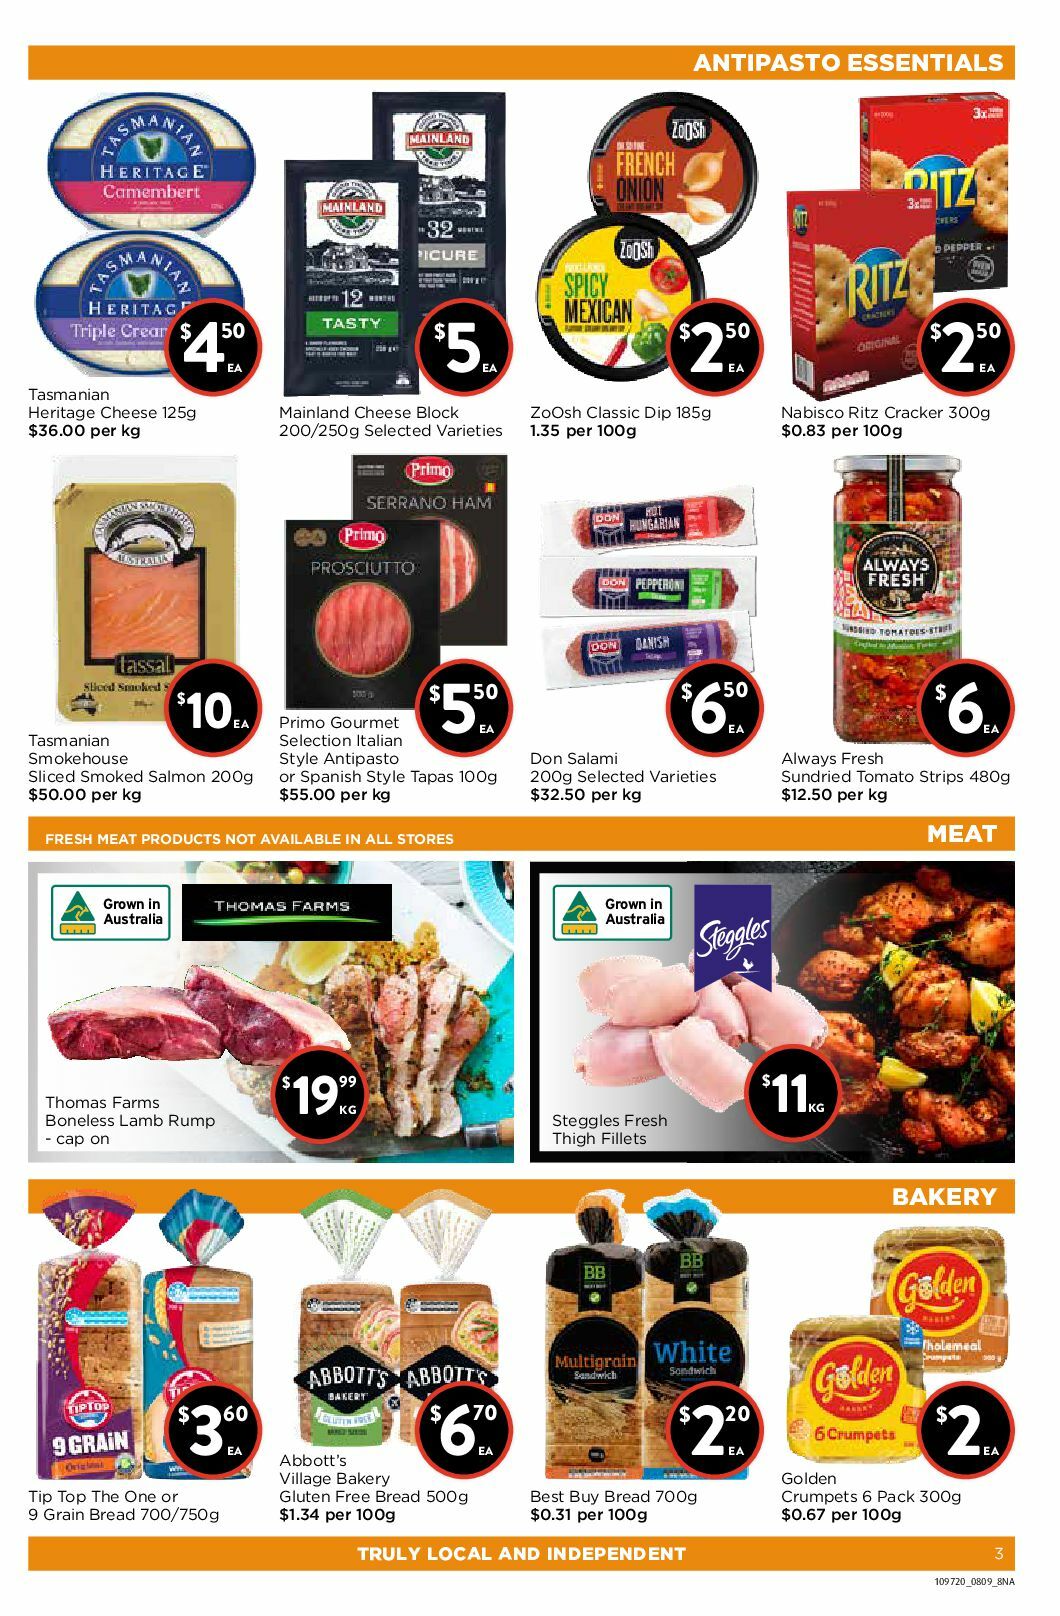 FoodWorks Catalogues from 8 September